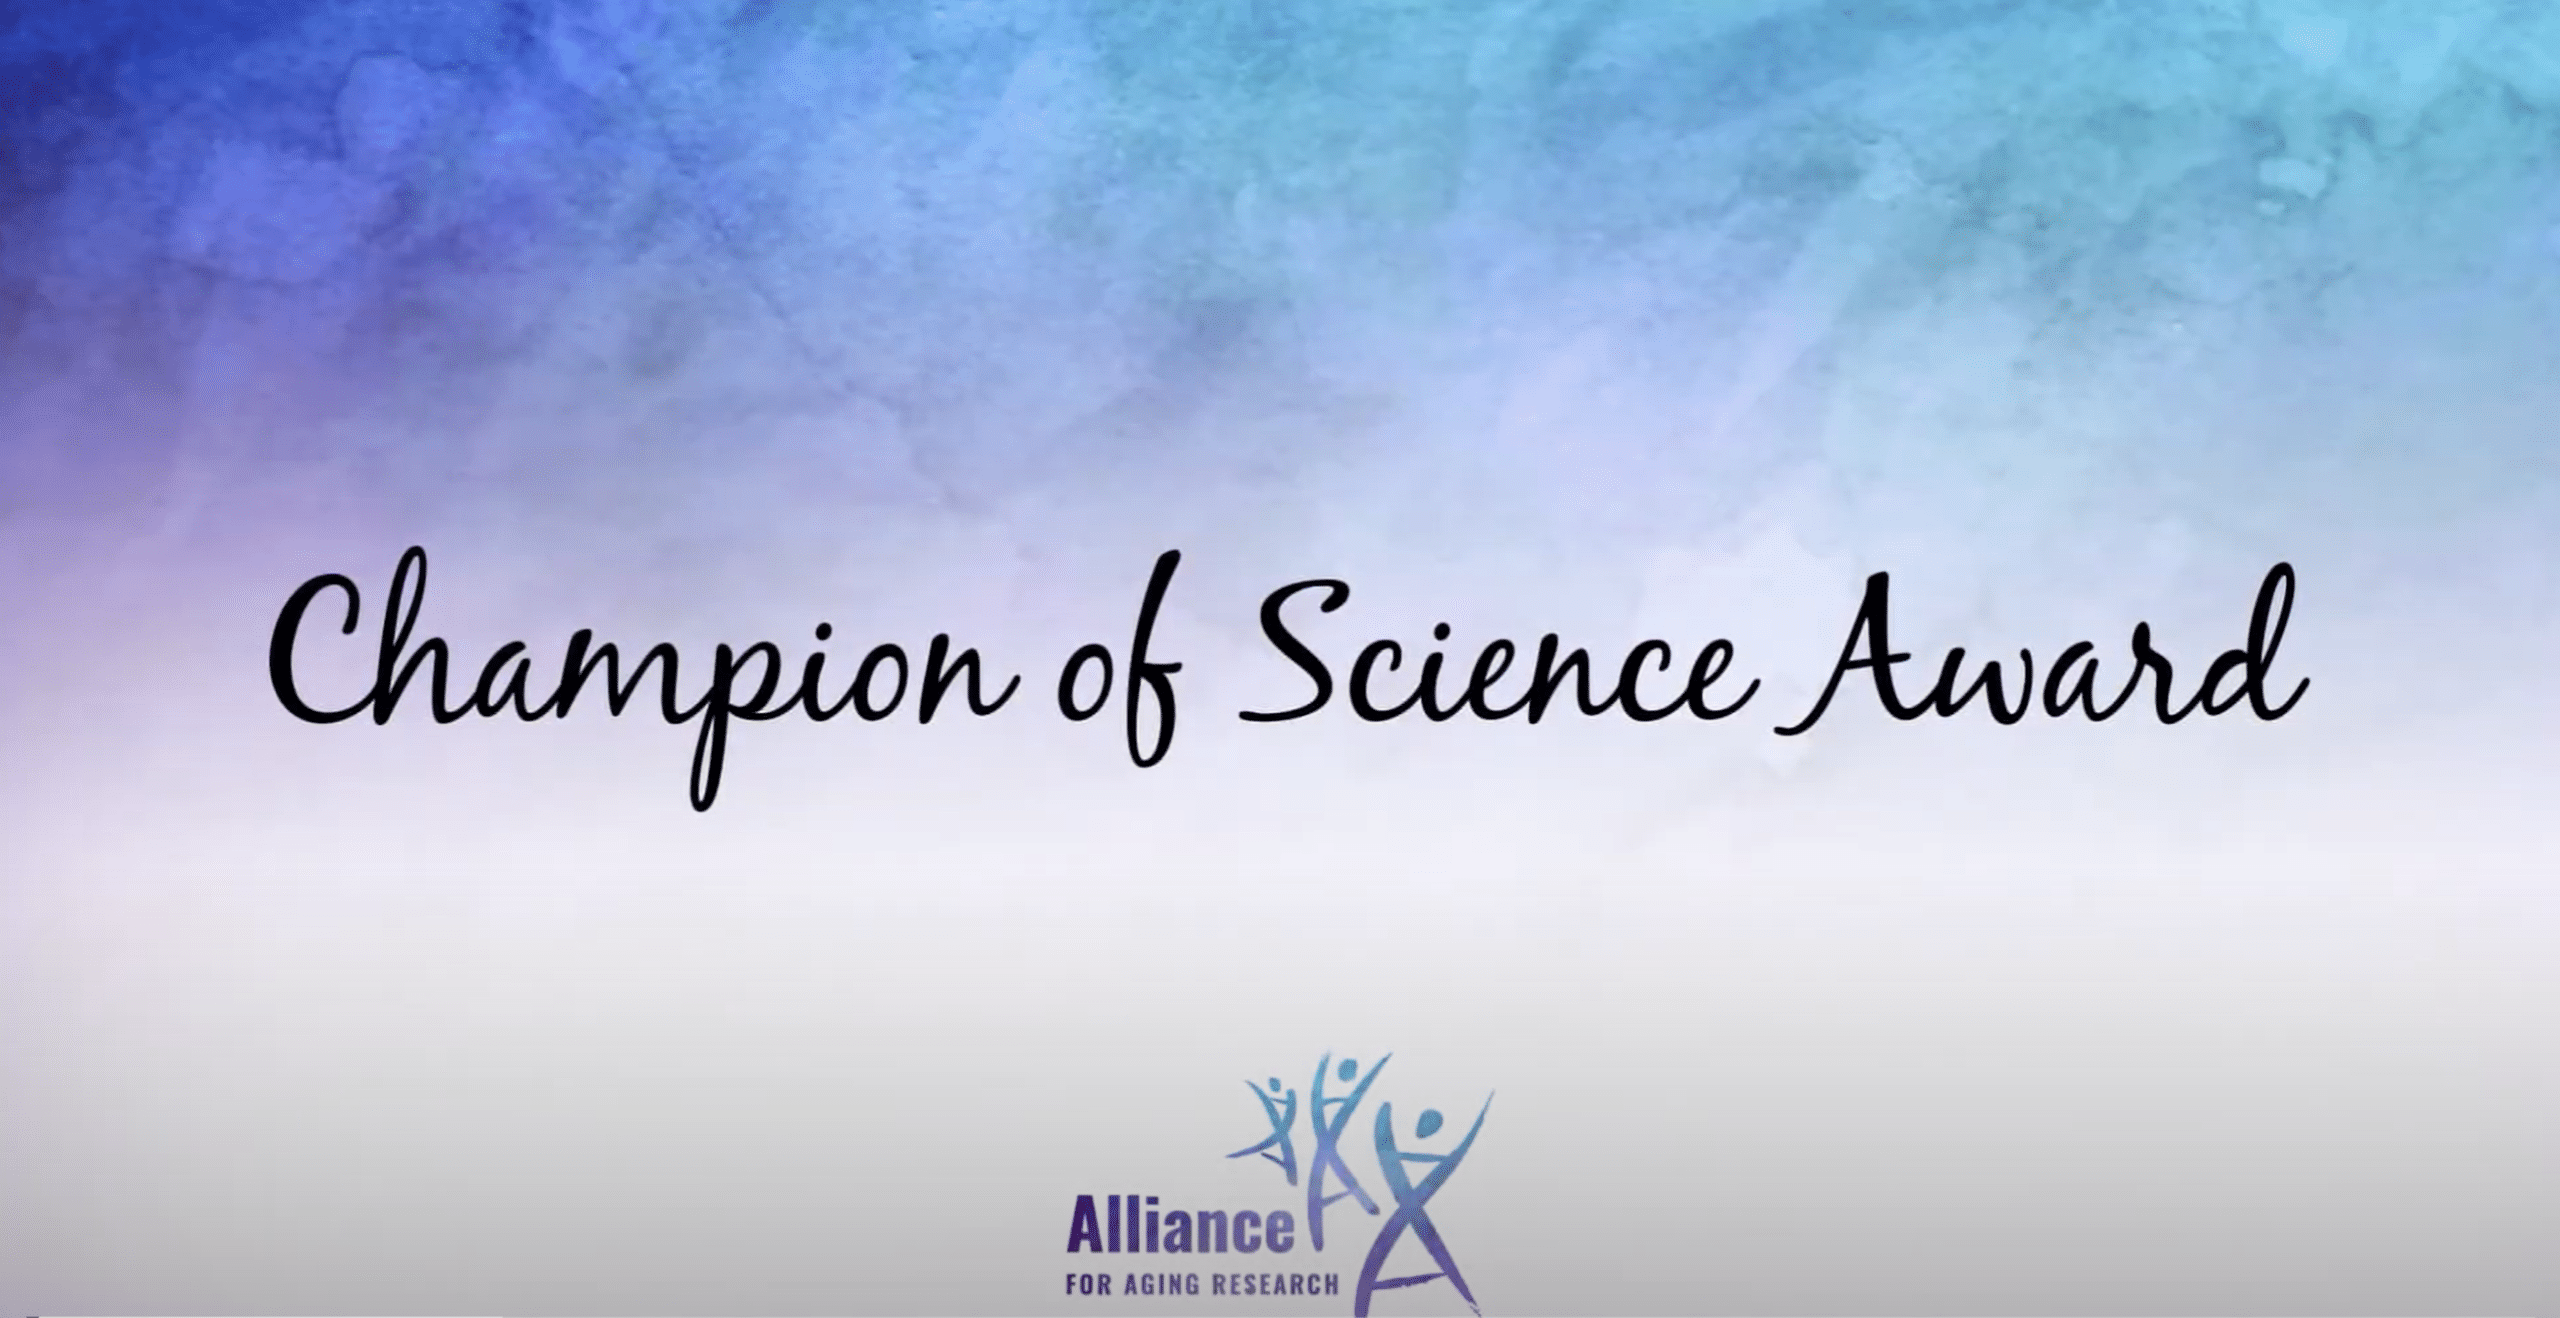 Title slide for Champion of Science Award at Alliance 2020 event.